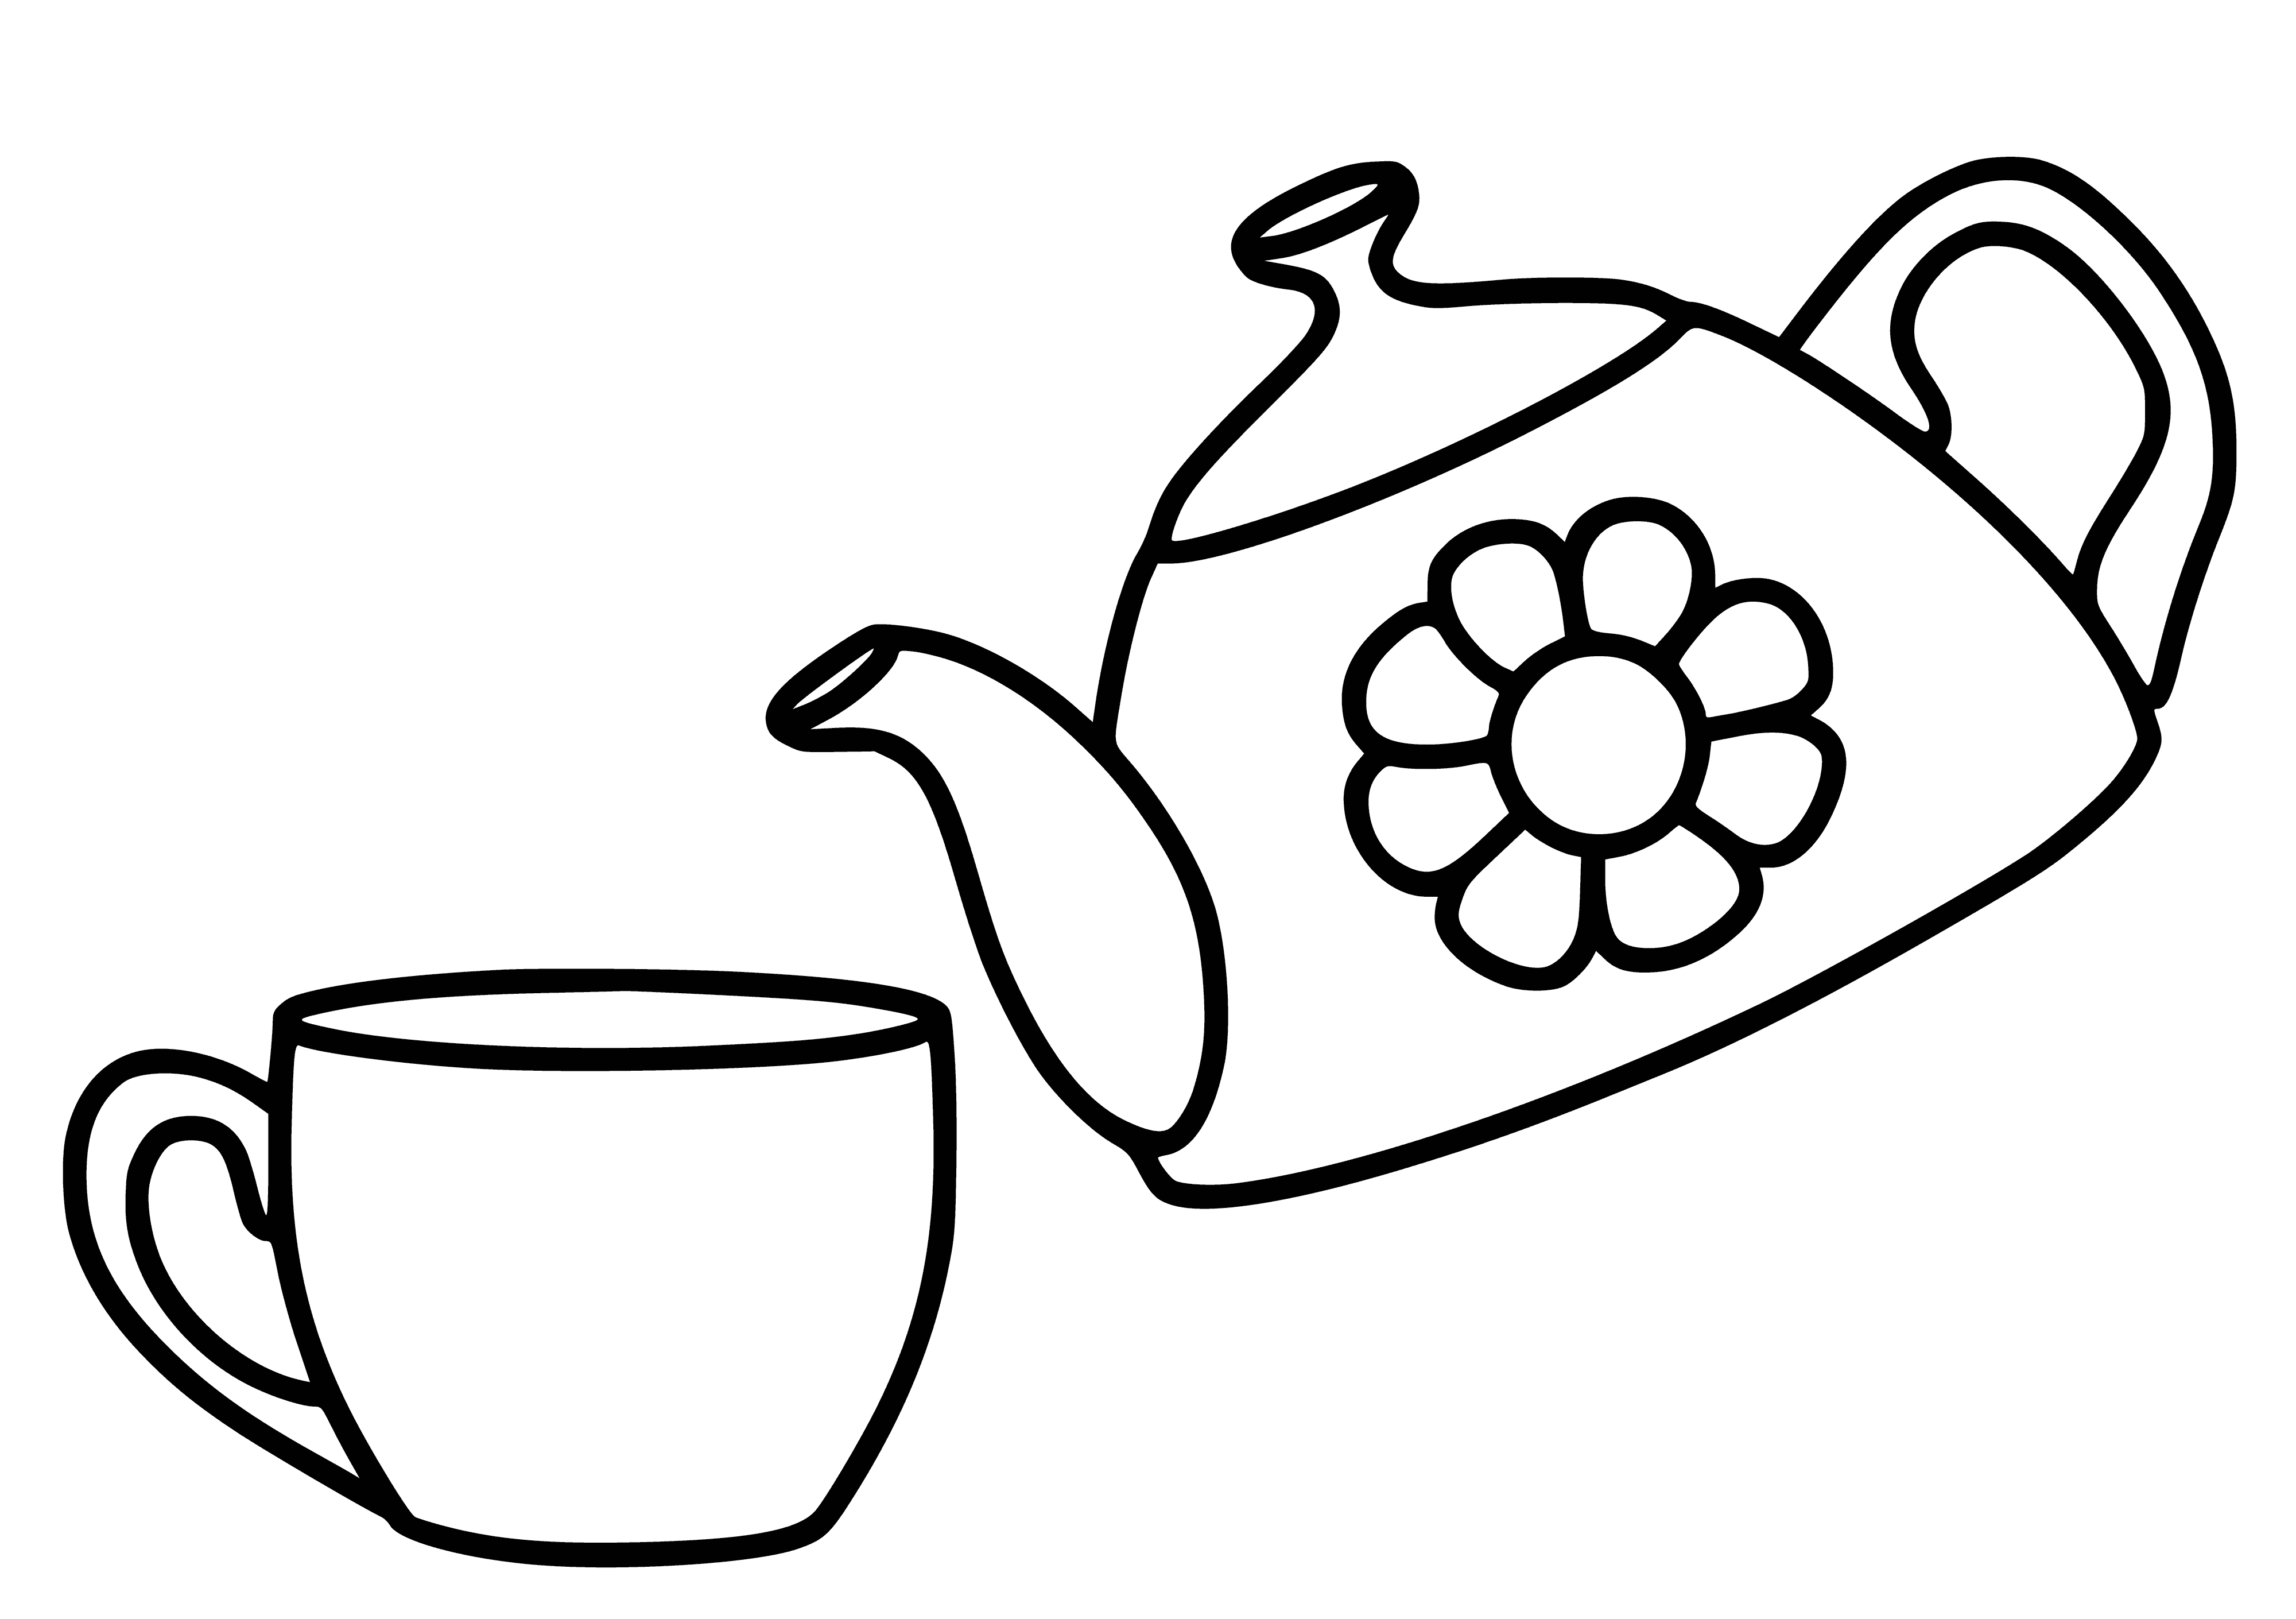 coloring page: Table shows blue teapot & yellow cup w/stars - teapot has 3 blue stars, cup has 1 yellow star. #stars